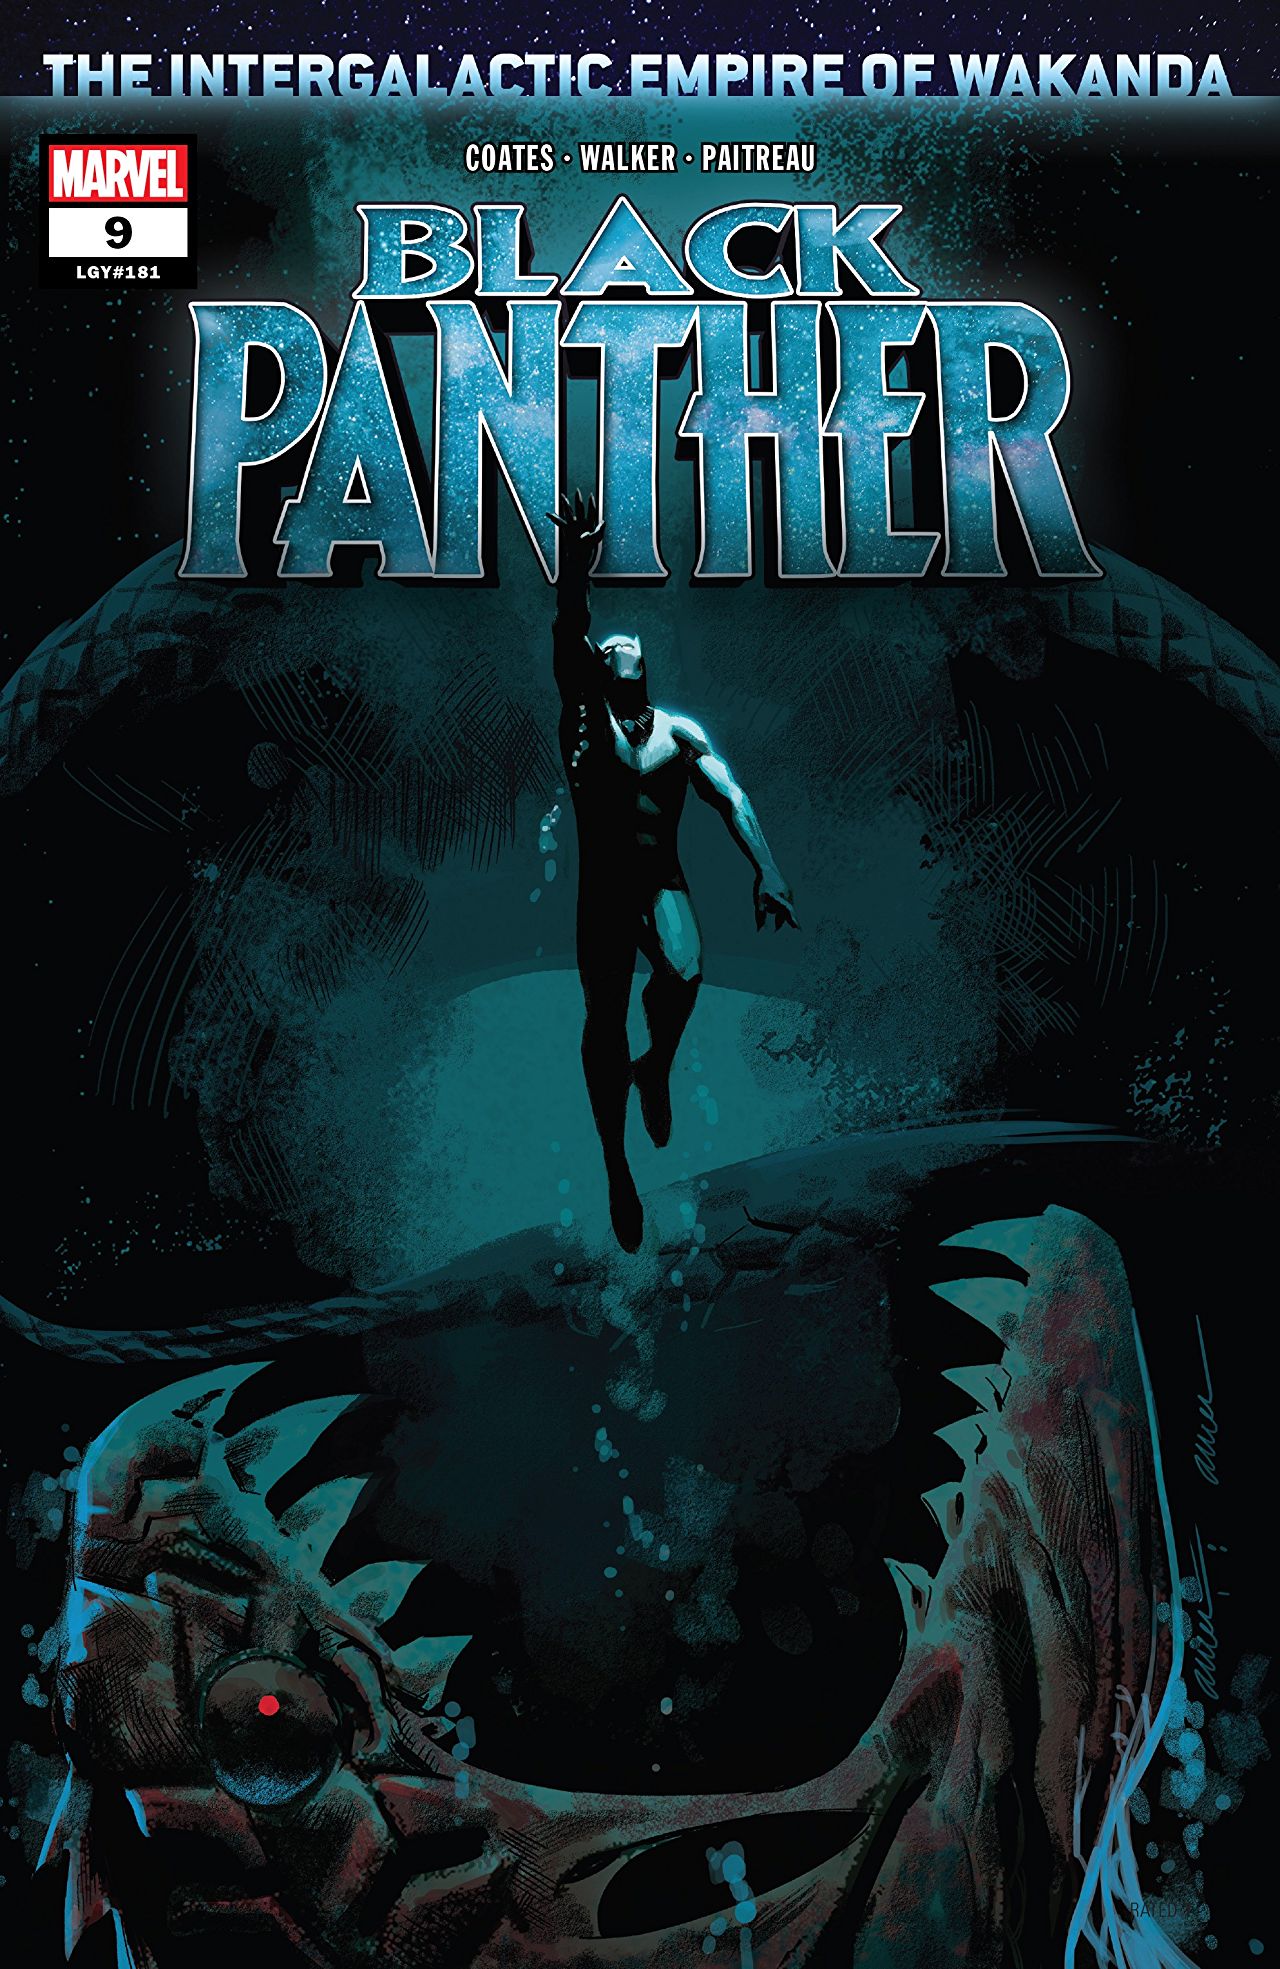 Marvel Preview: Black Panther #9